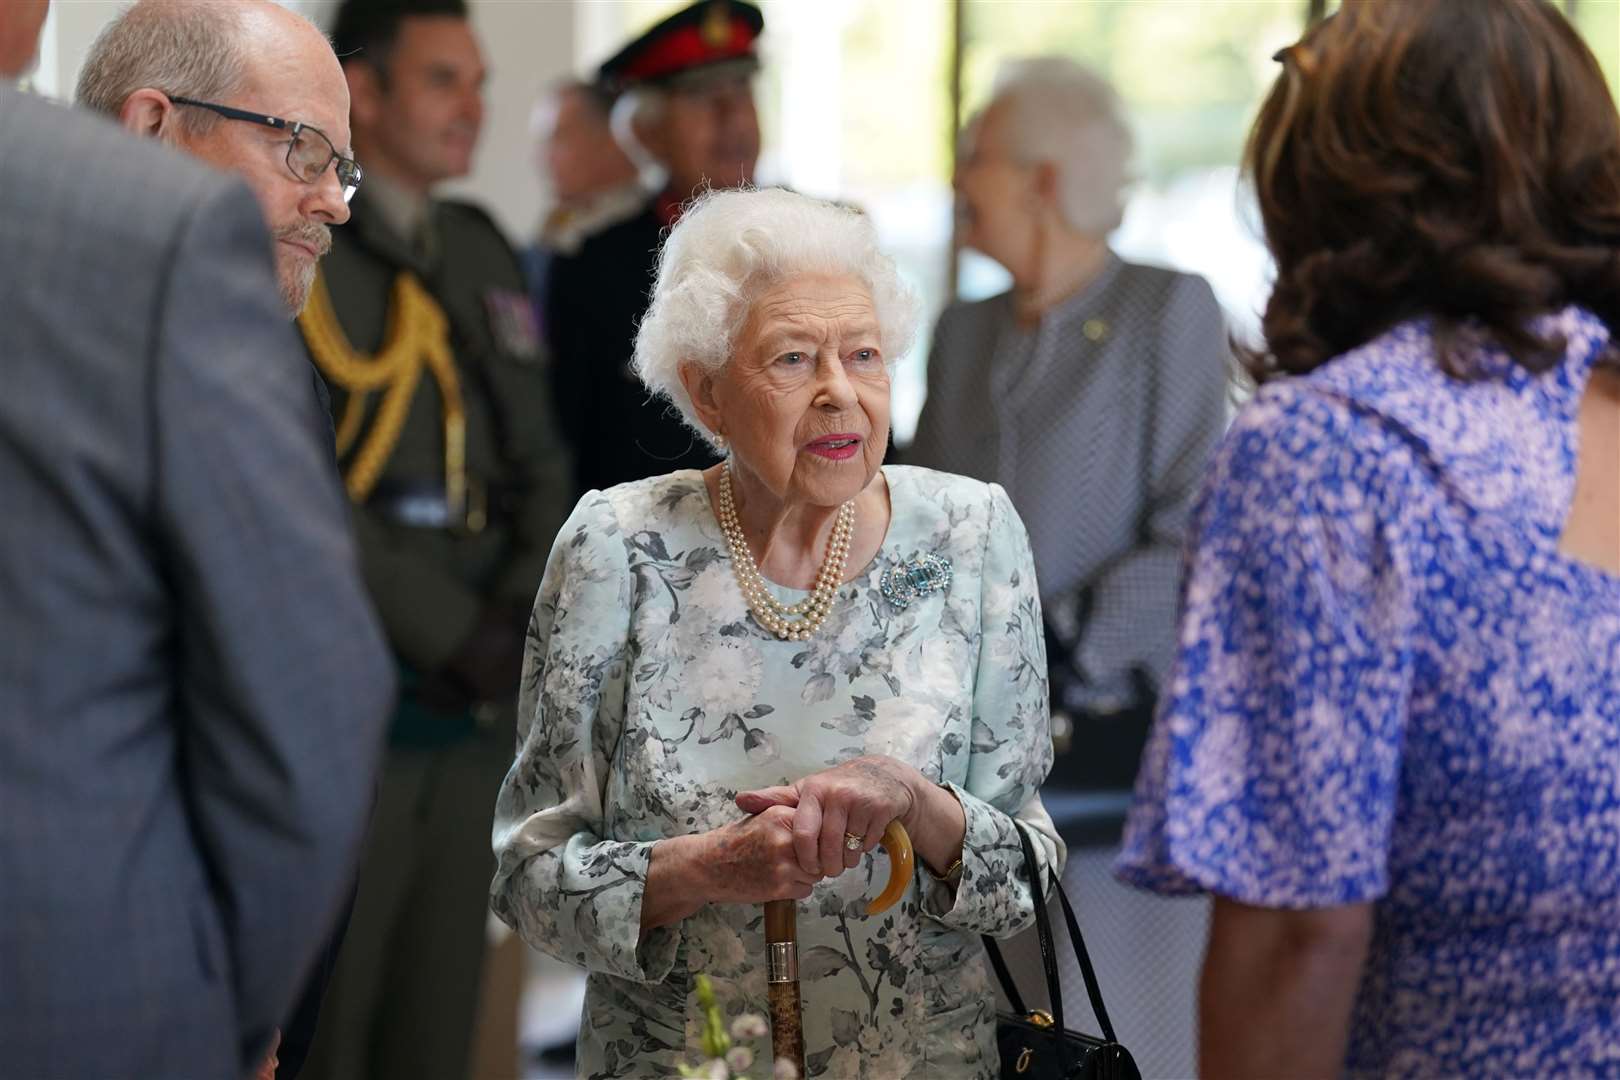 The Queen chatted to volunteers during her visit (Kirsty O’Connor/PA)